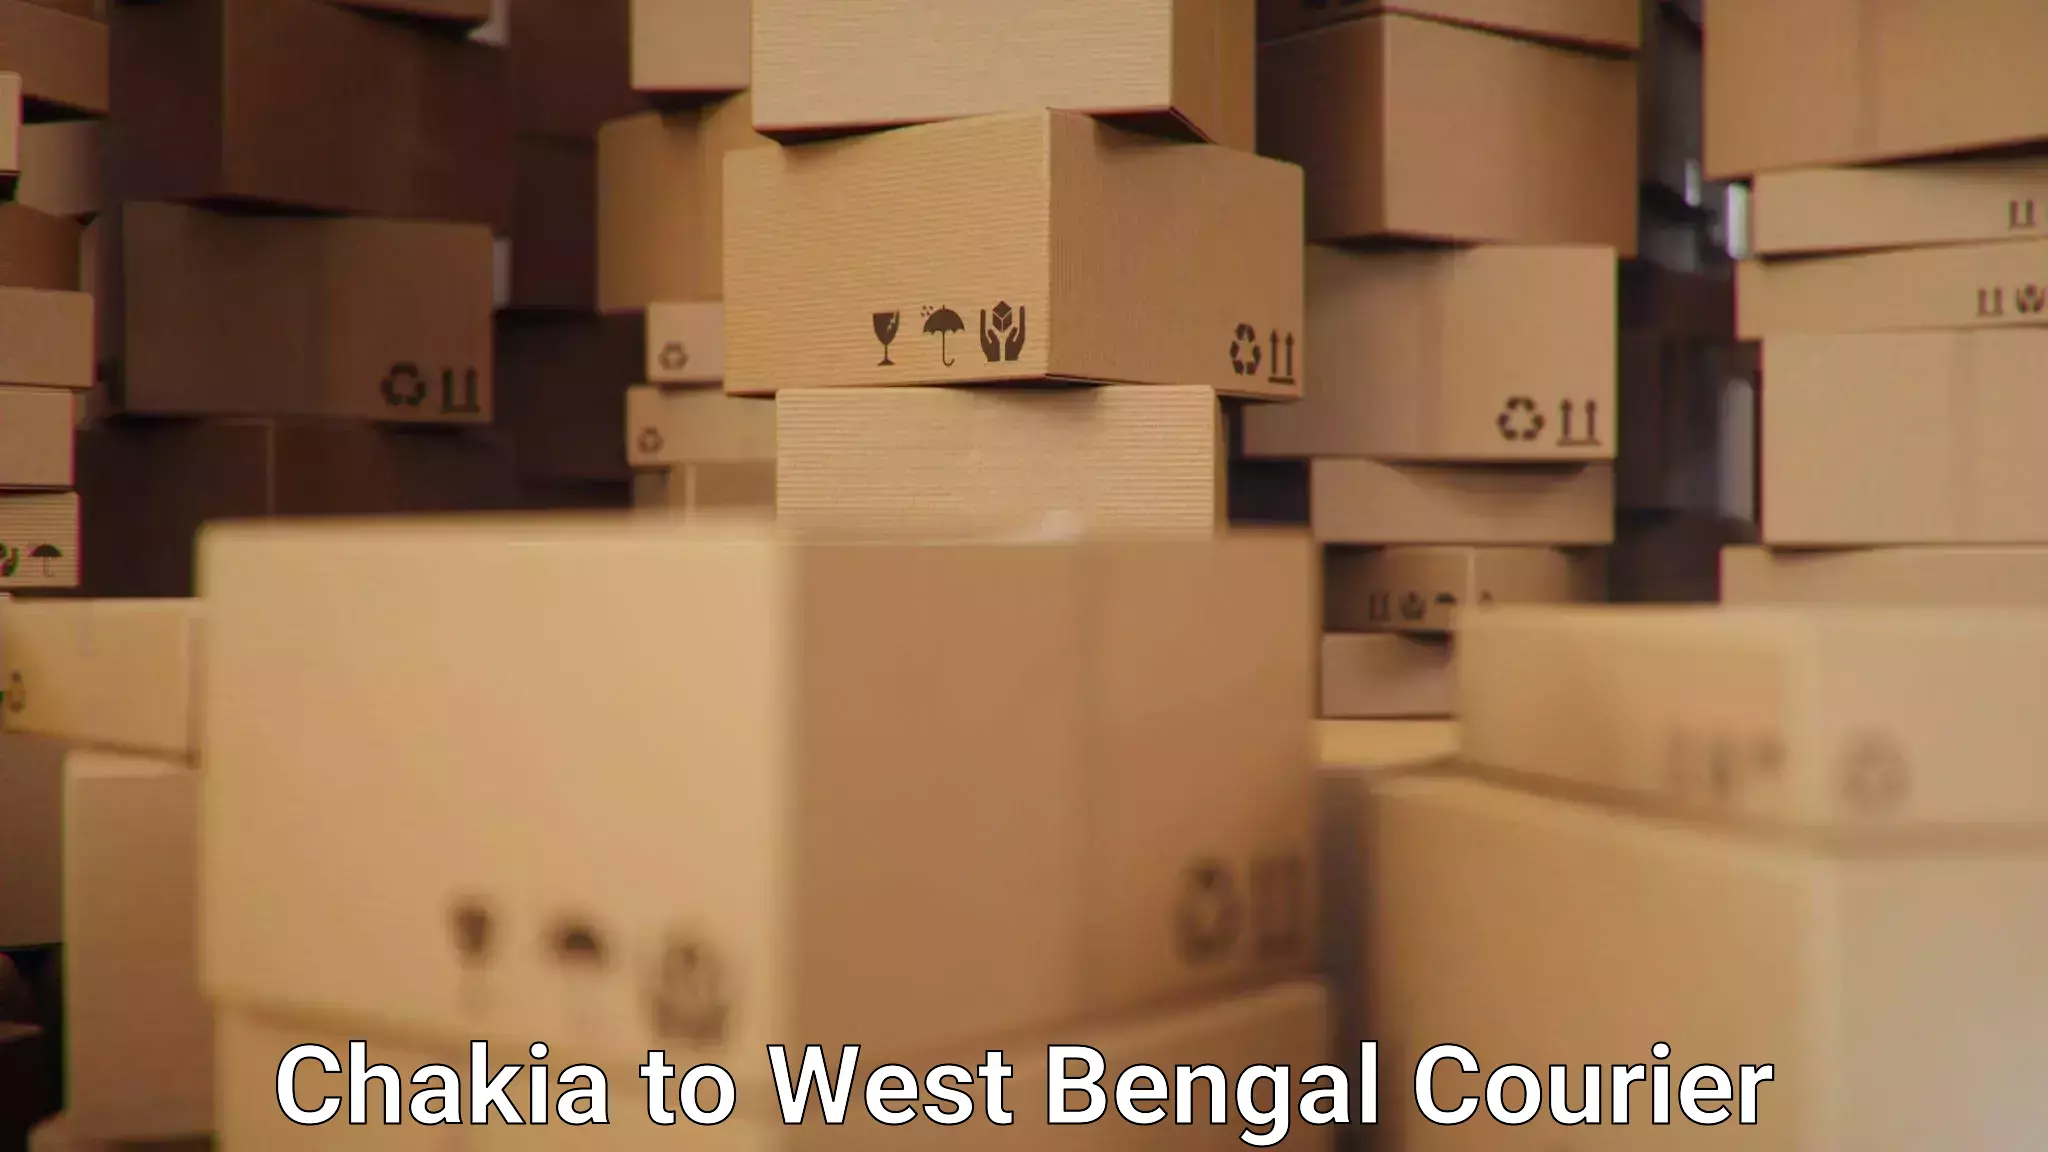 Courier service partnerships Chakia to West Bengal